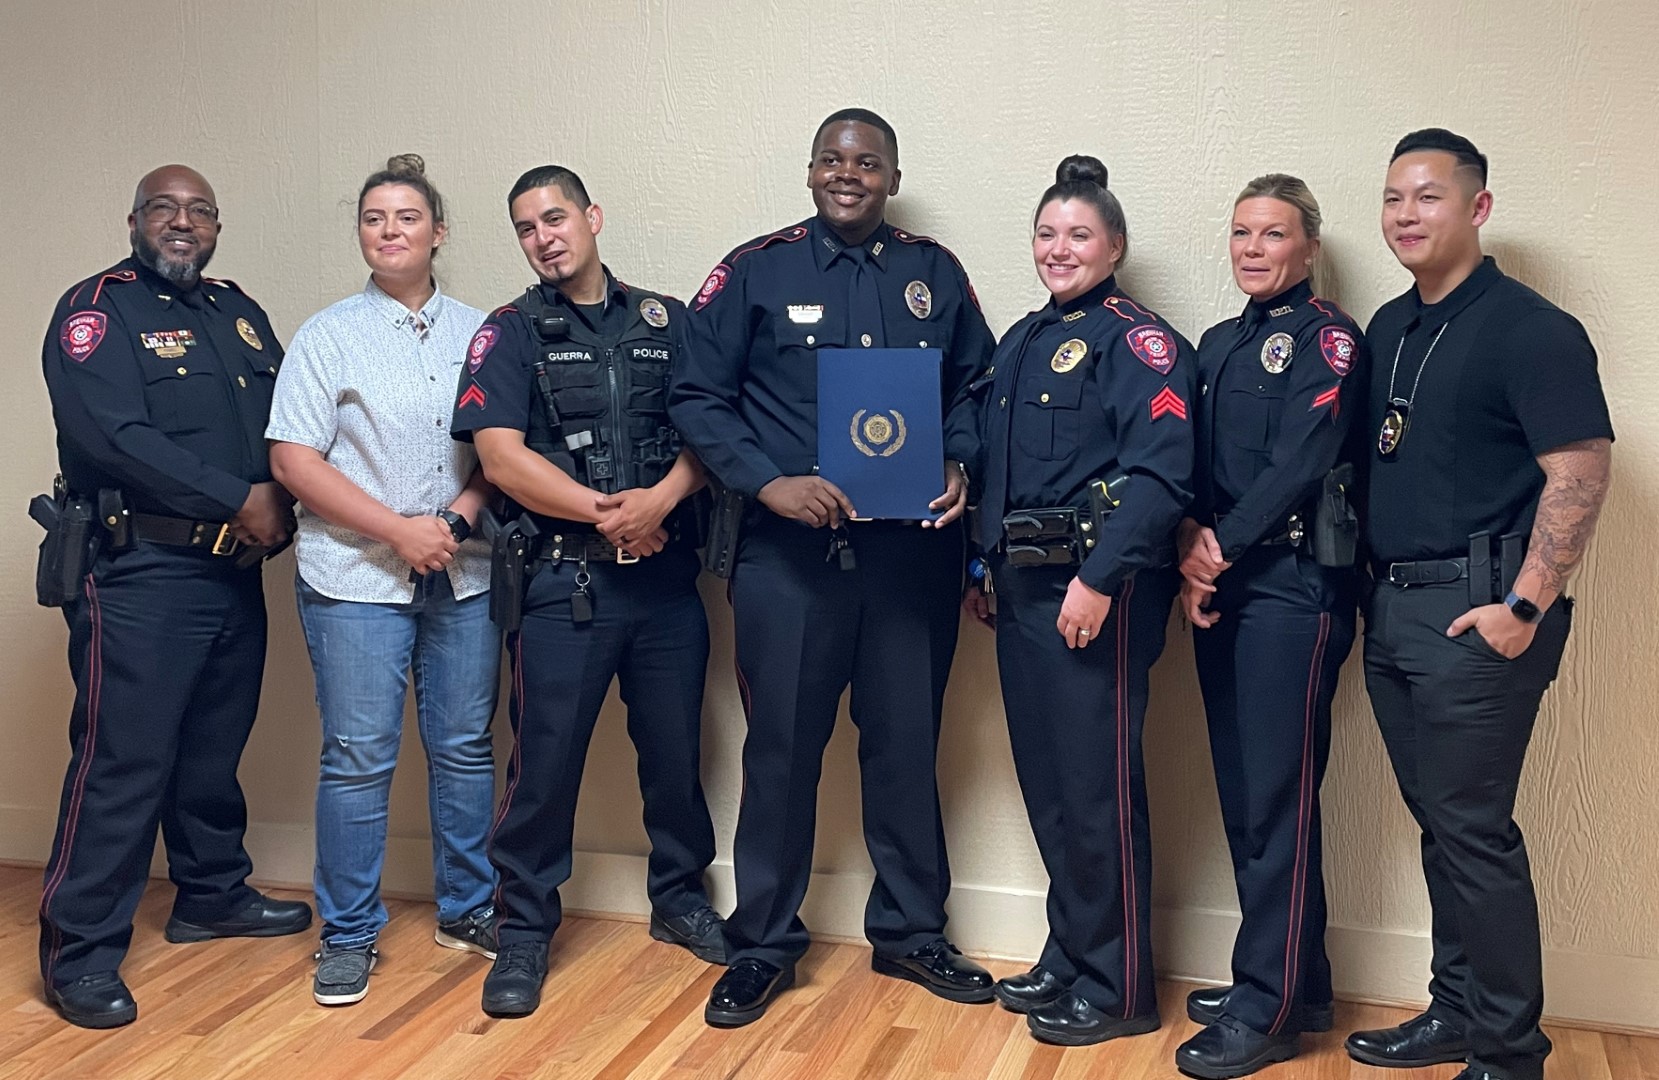 Picture of Officer Eric Crosby accepting award, Picture left to right, Assistant Police Chief Powell, Officer Vieceli, Officer Guerra, Officer Crosby, Officer Burns, Officer Bruno, Officer Ha